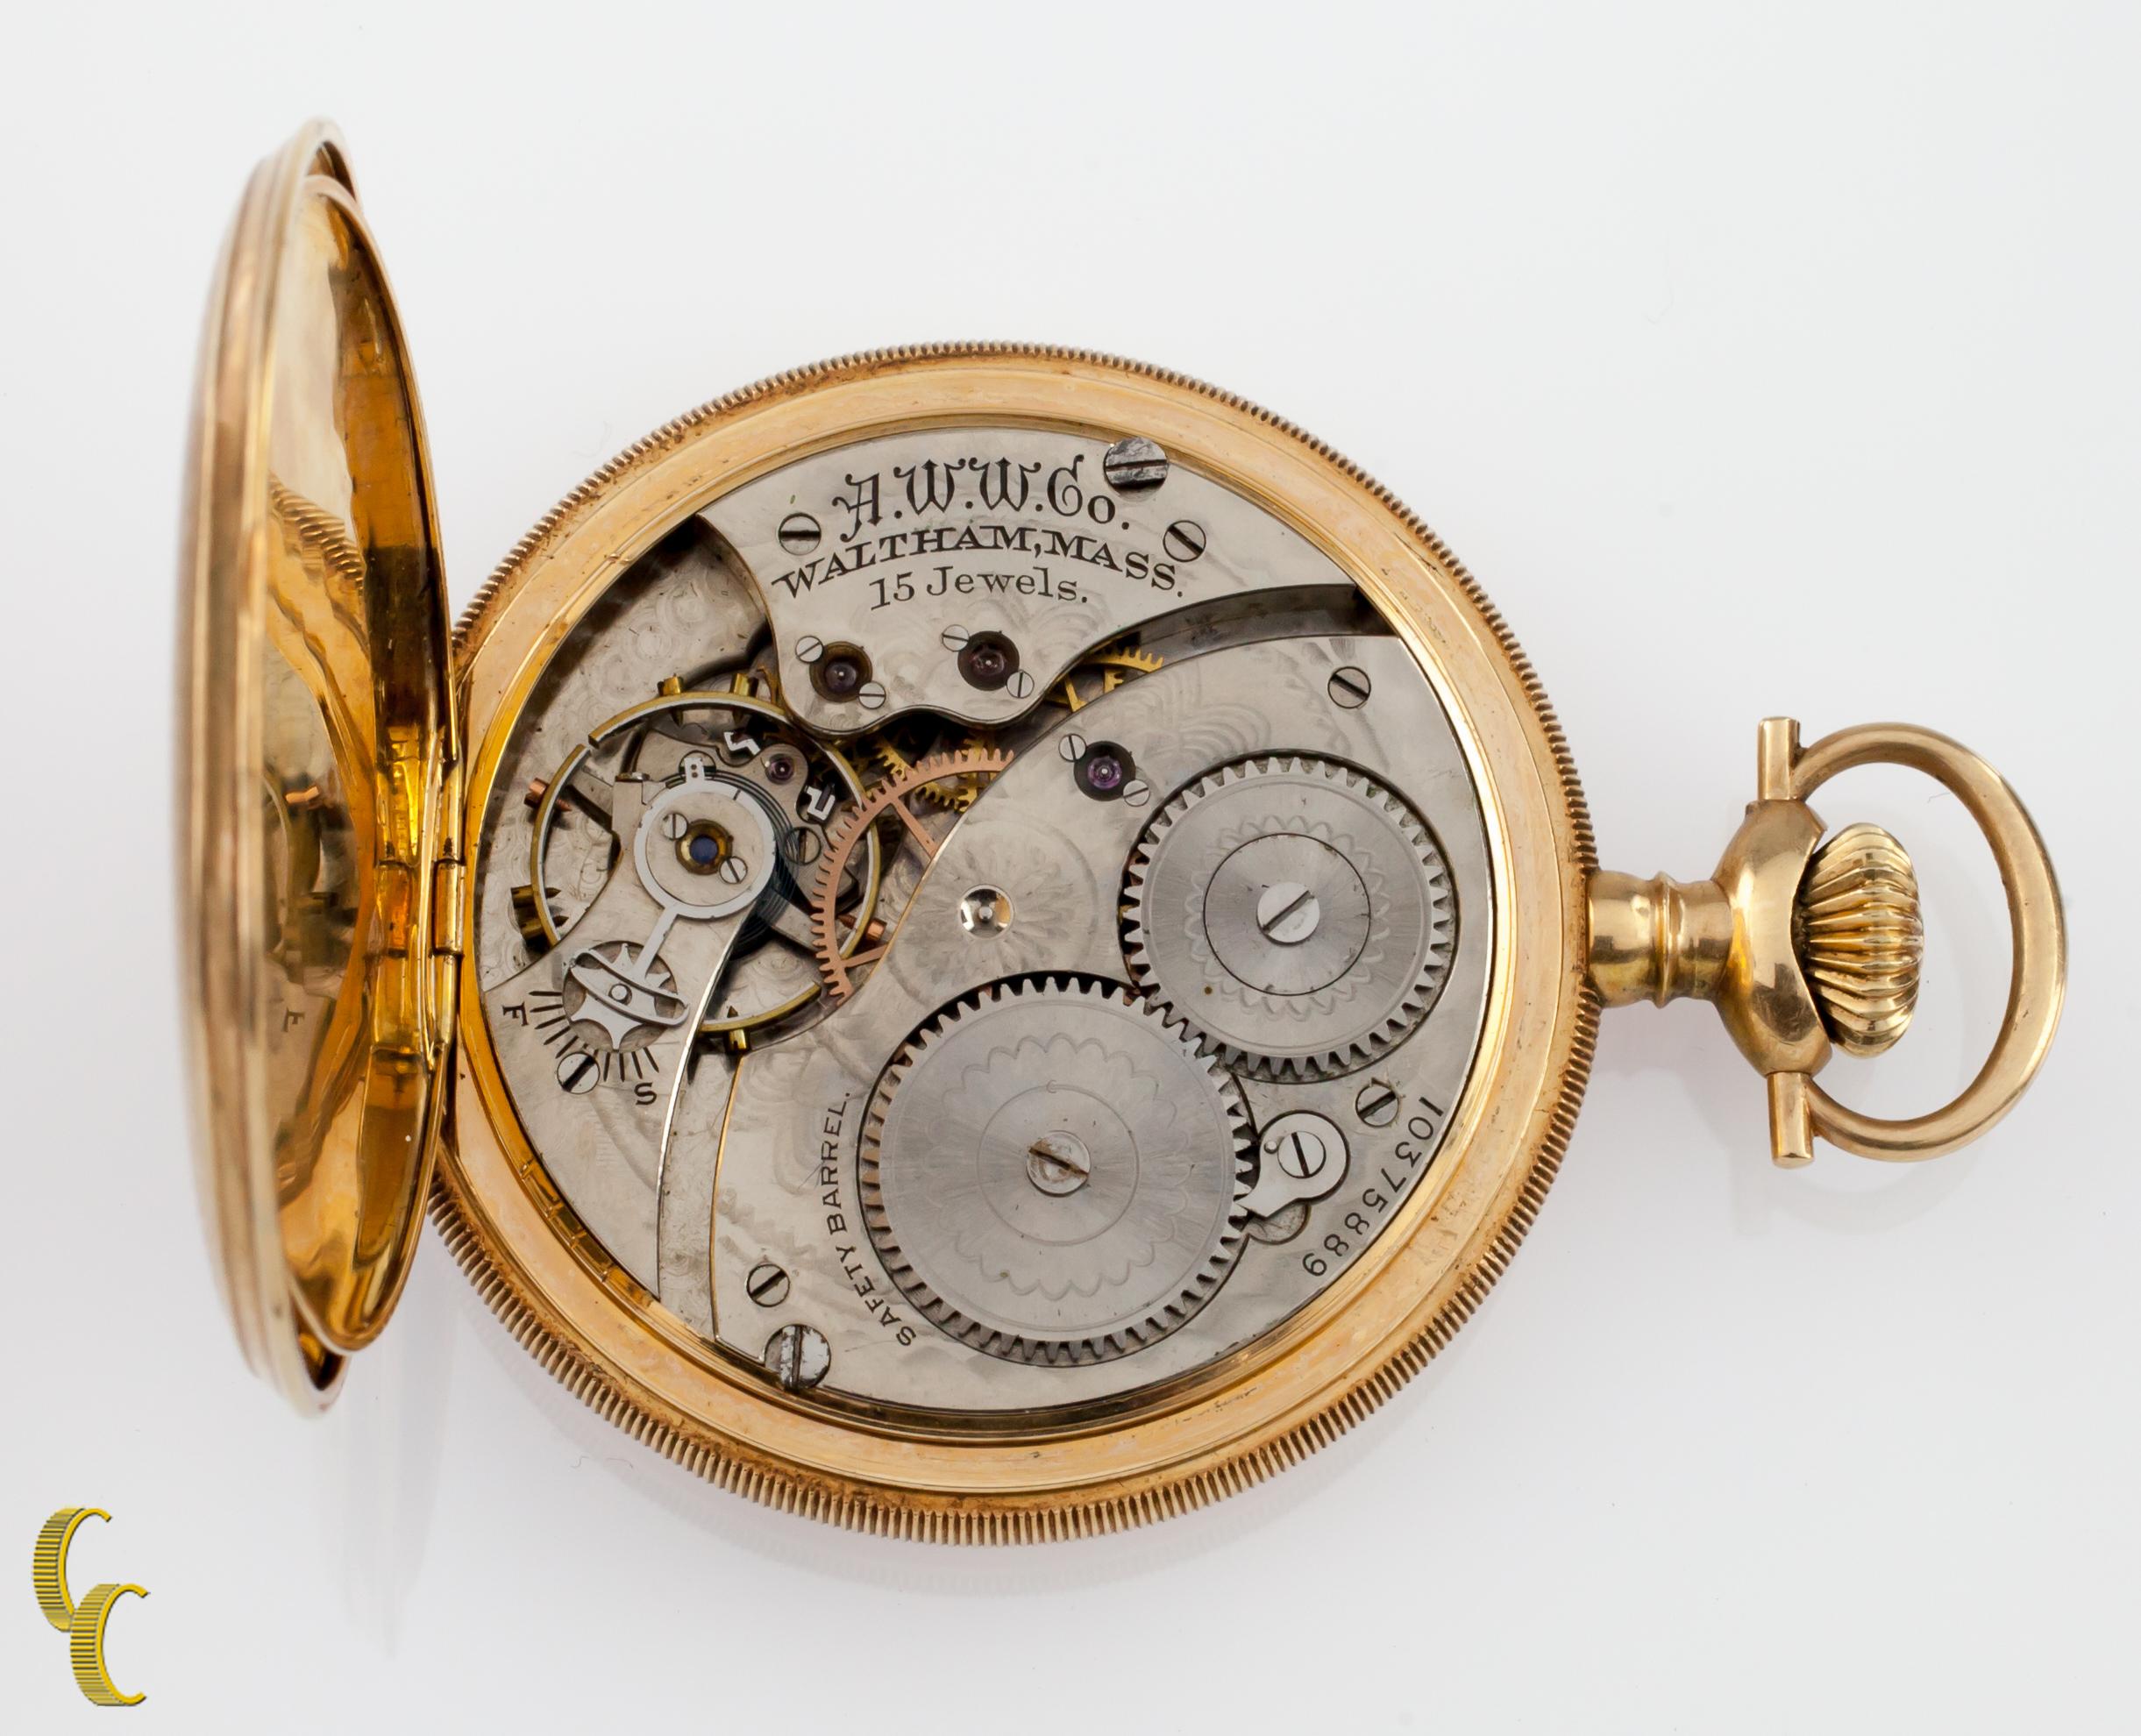 Beautiful Antique Waltham Pocket Watch w/ White Dial Including Cobalt Blue Hands & Dedicated Second Dial
14k Yellow Solid Gold Case w/ Intricate Guilloche Design on Reverse and Front of Case
Black Arabic Numerals
Case Serial #126614
15-Jewel Waltham